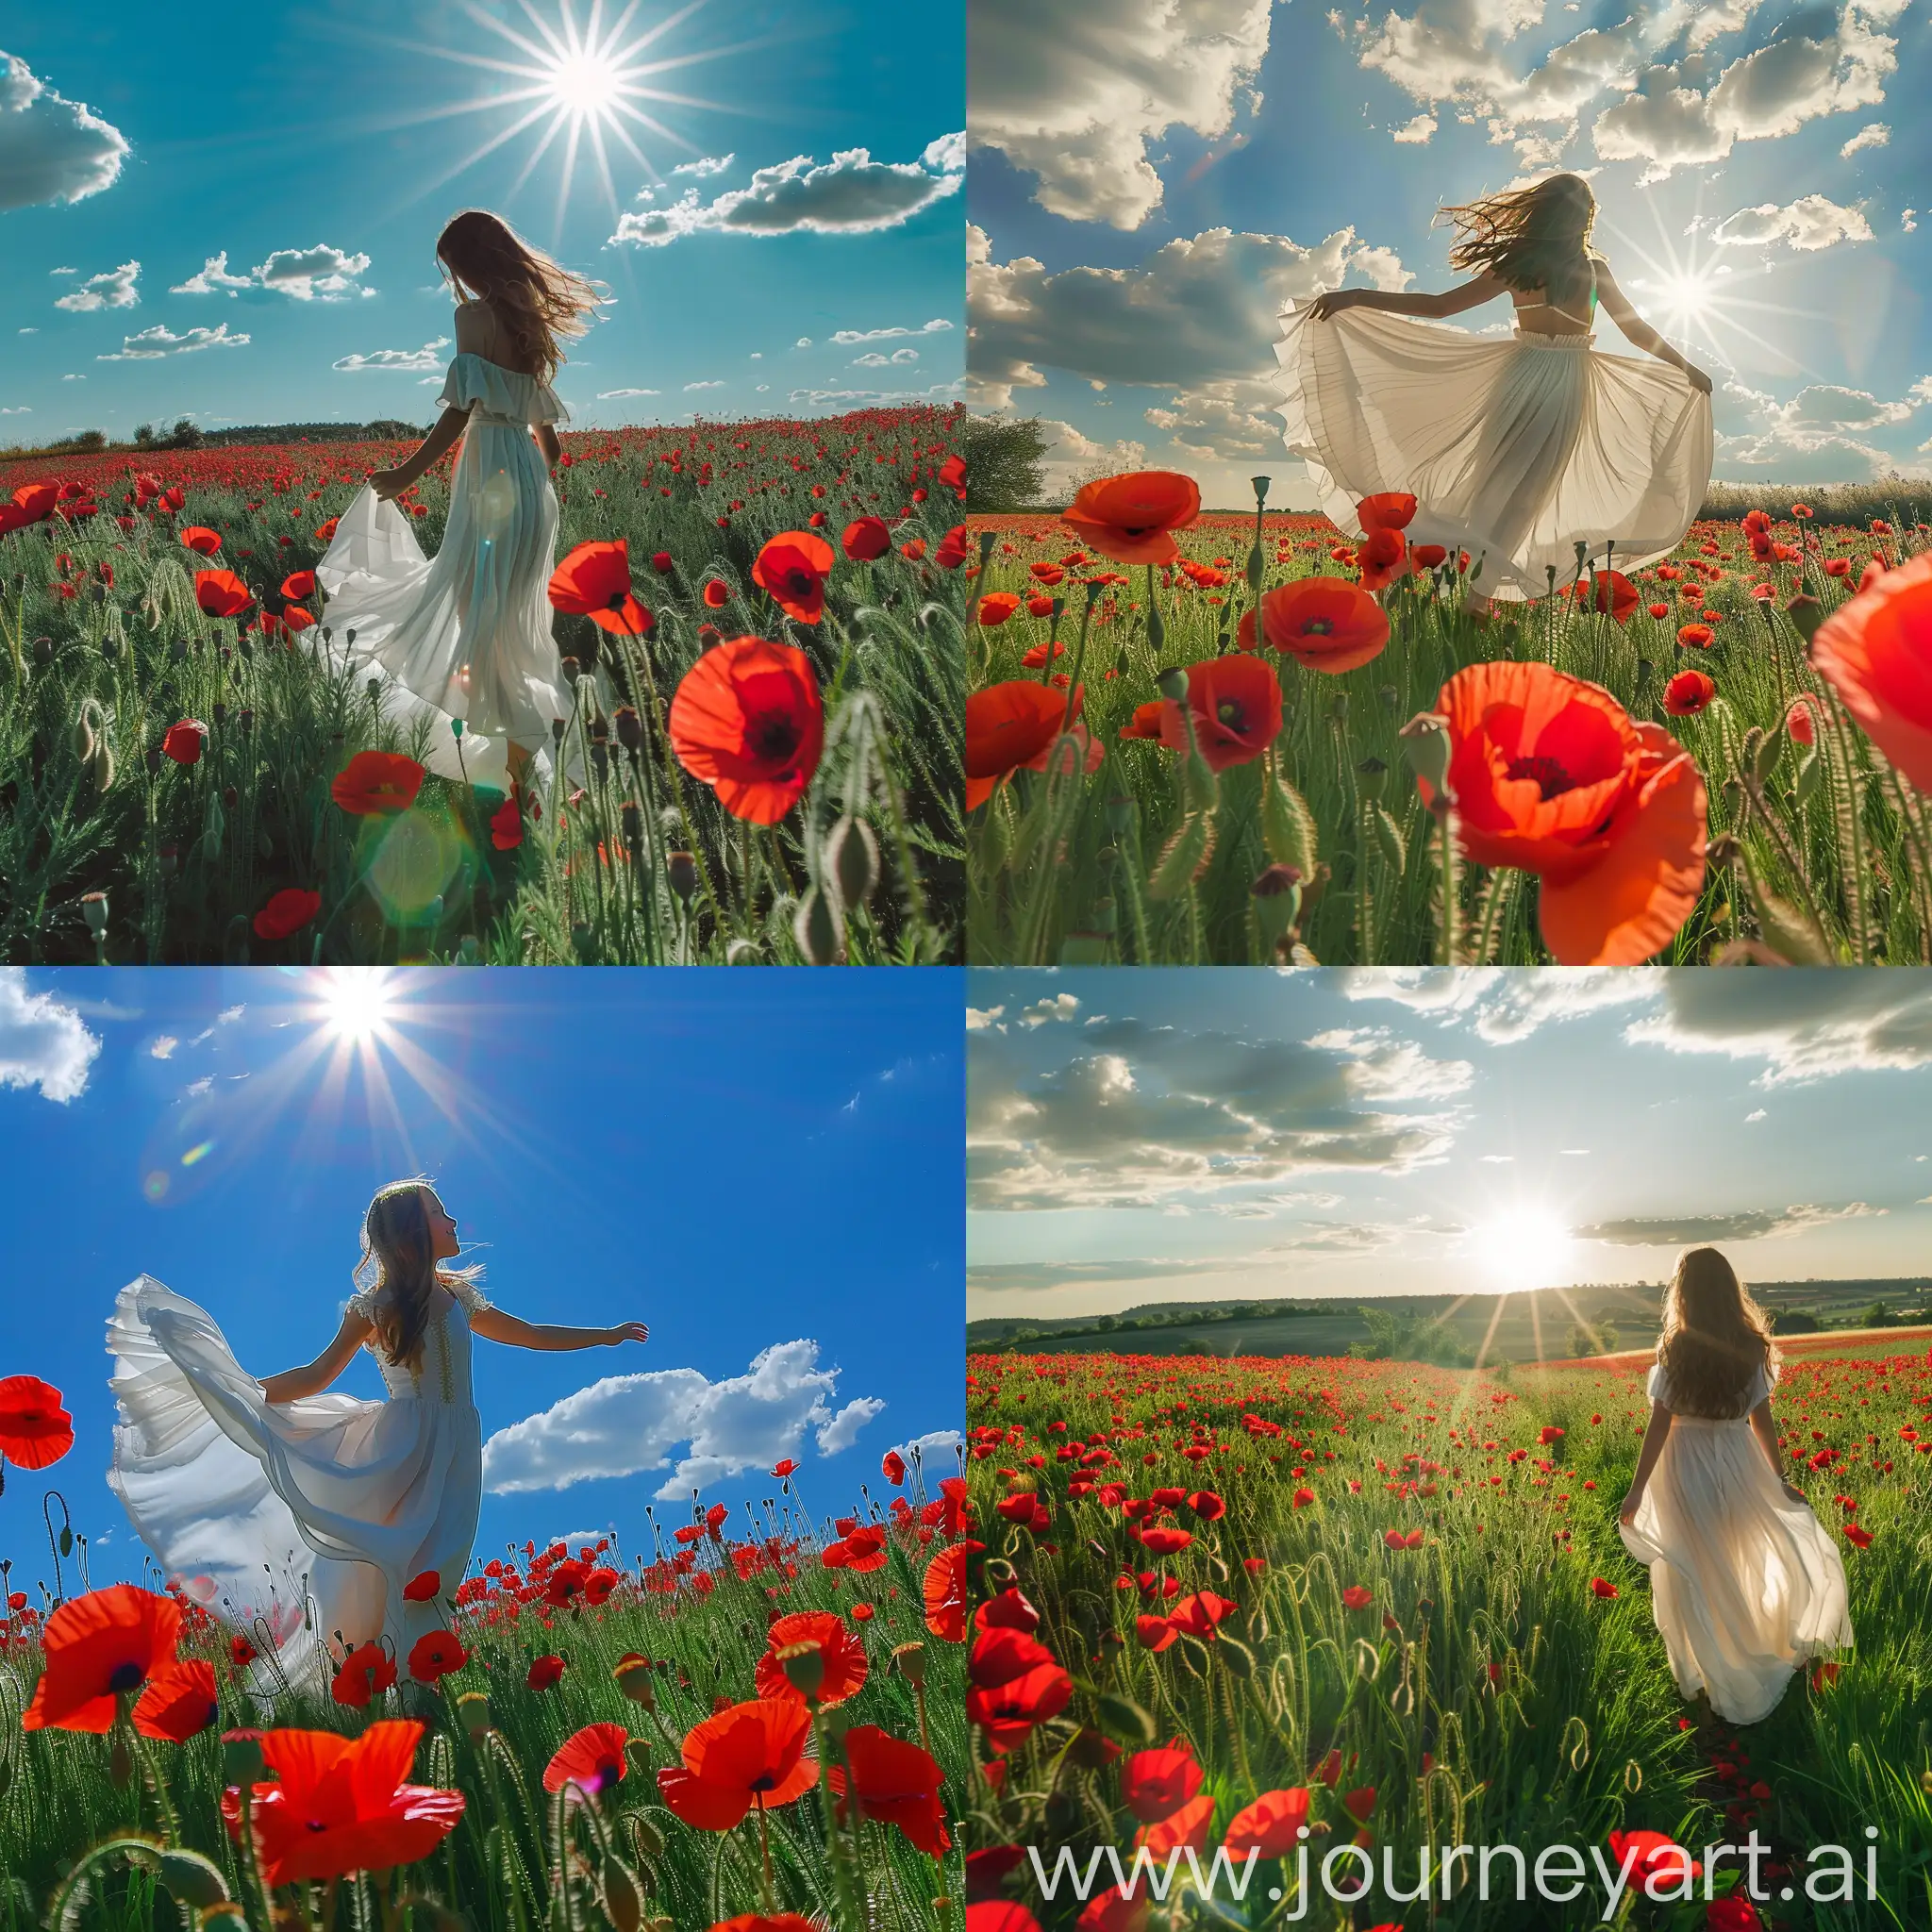 Girl-in-Pretty-White-Dress-Surrounded-by-Bright-Poppy-Field-Under-Sunny-Sky